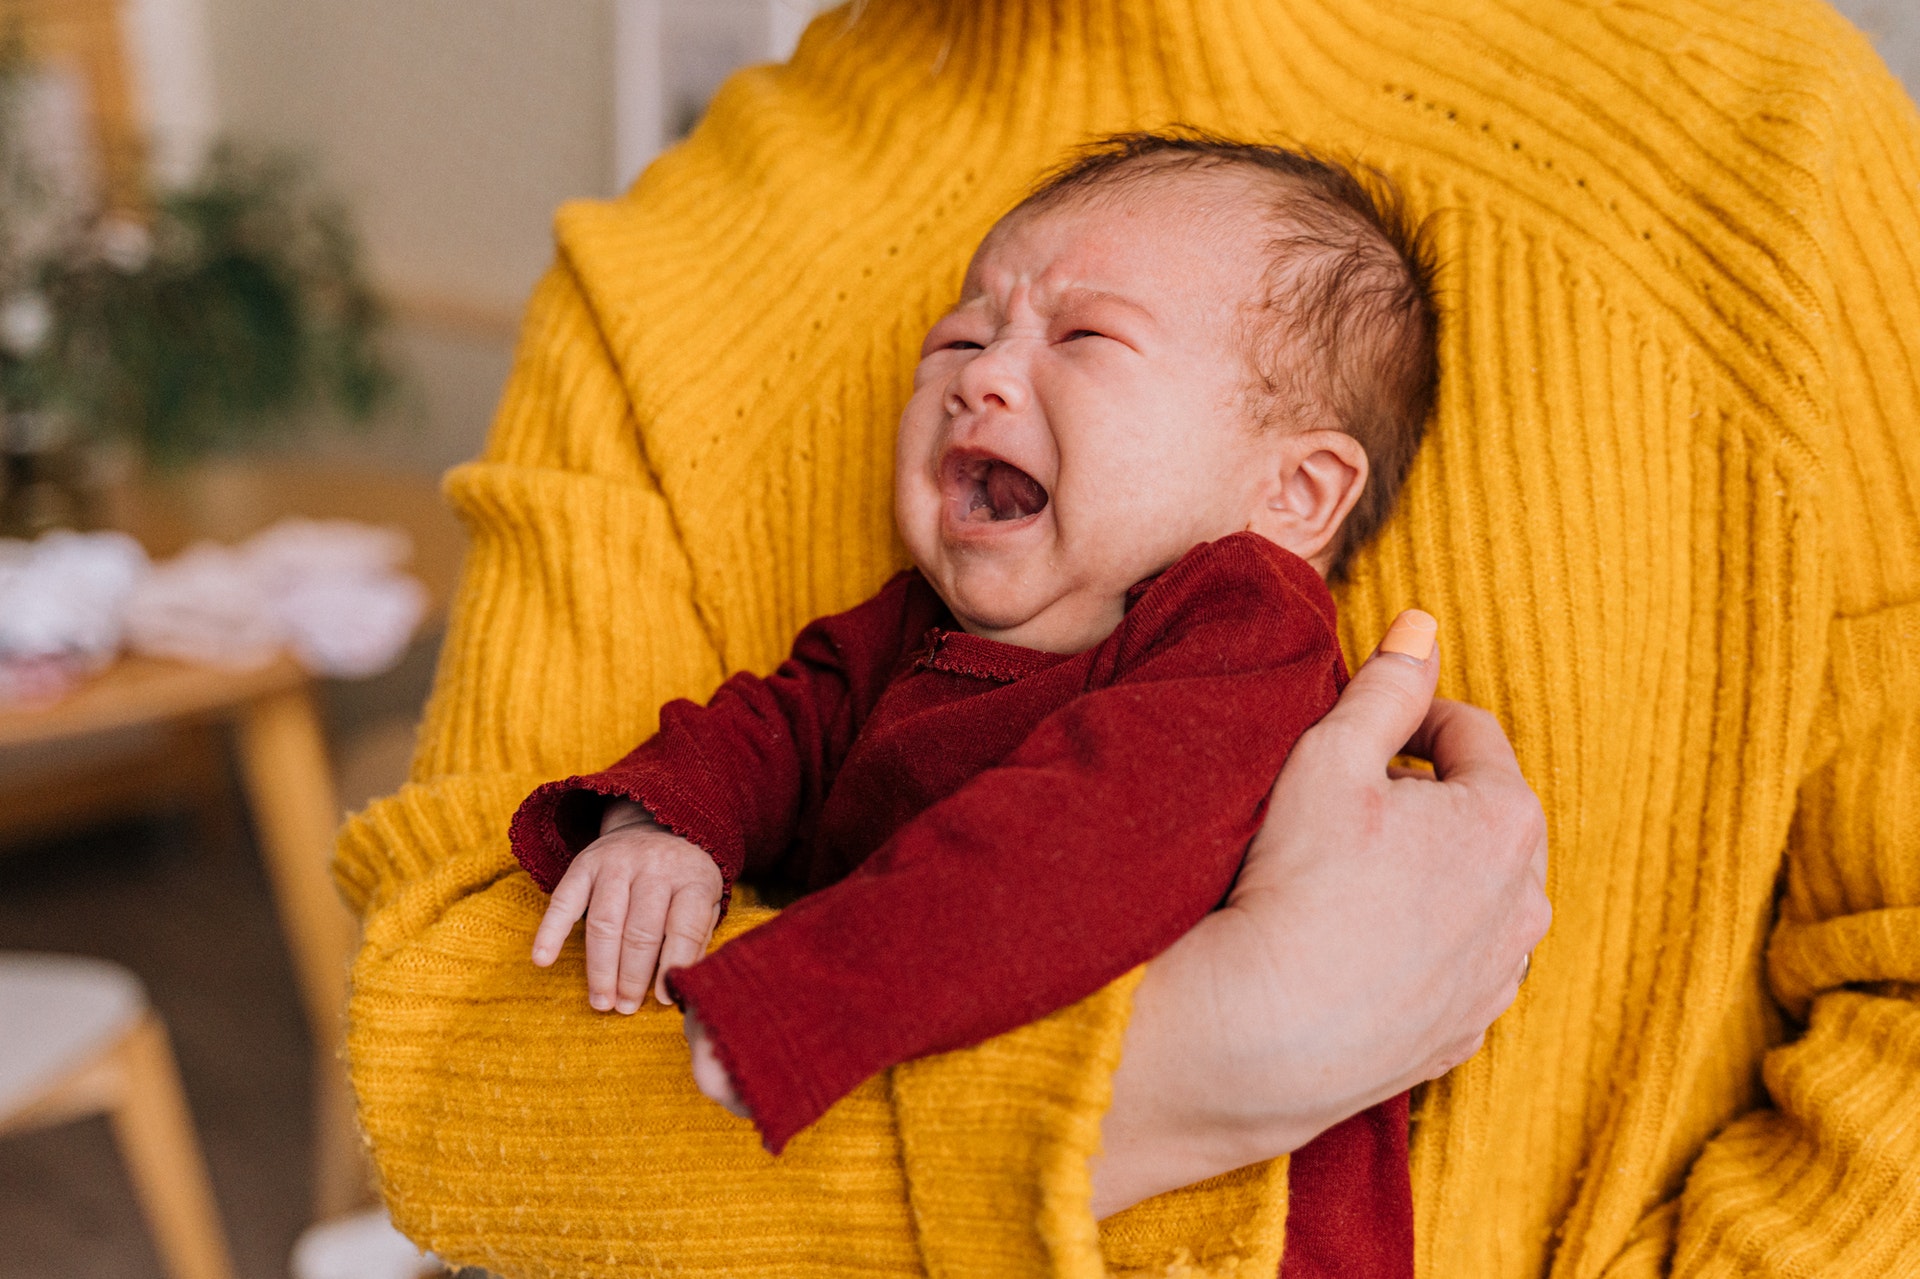 spiritual meaning of hearing a baby cry